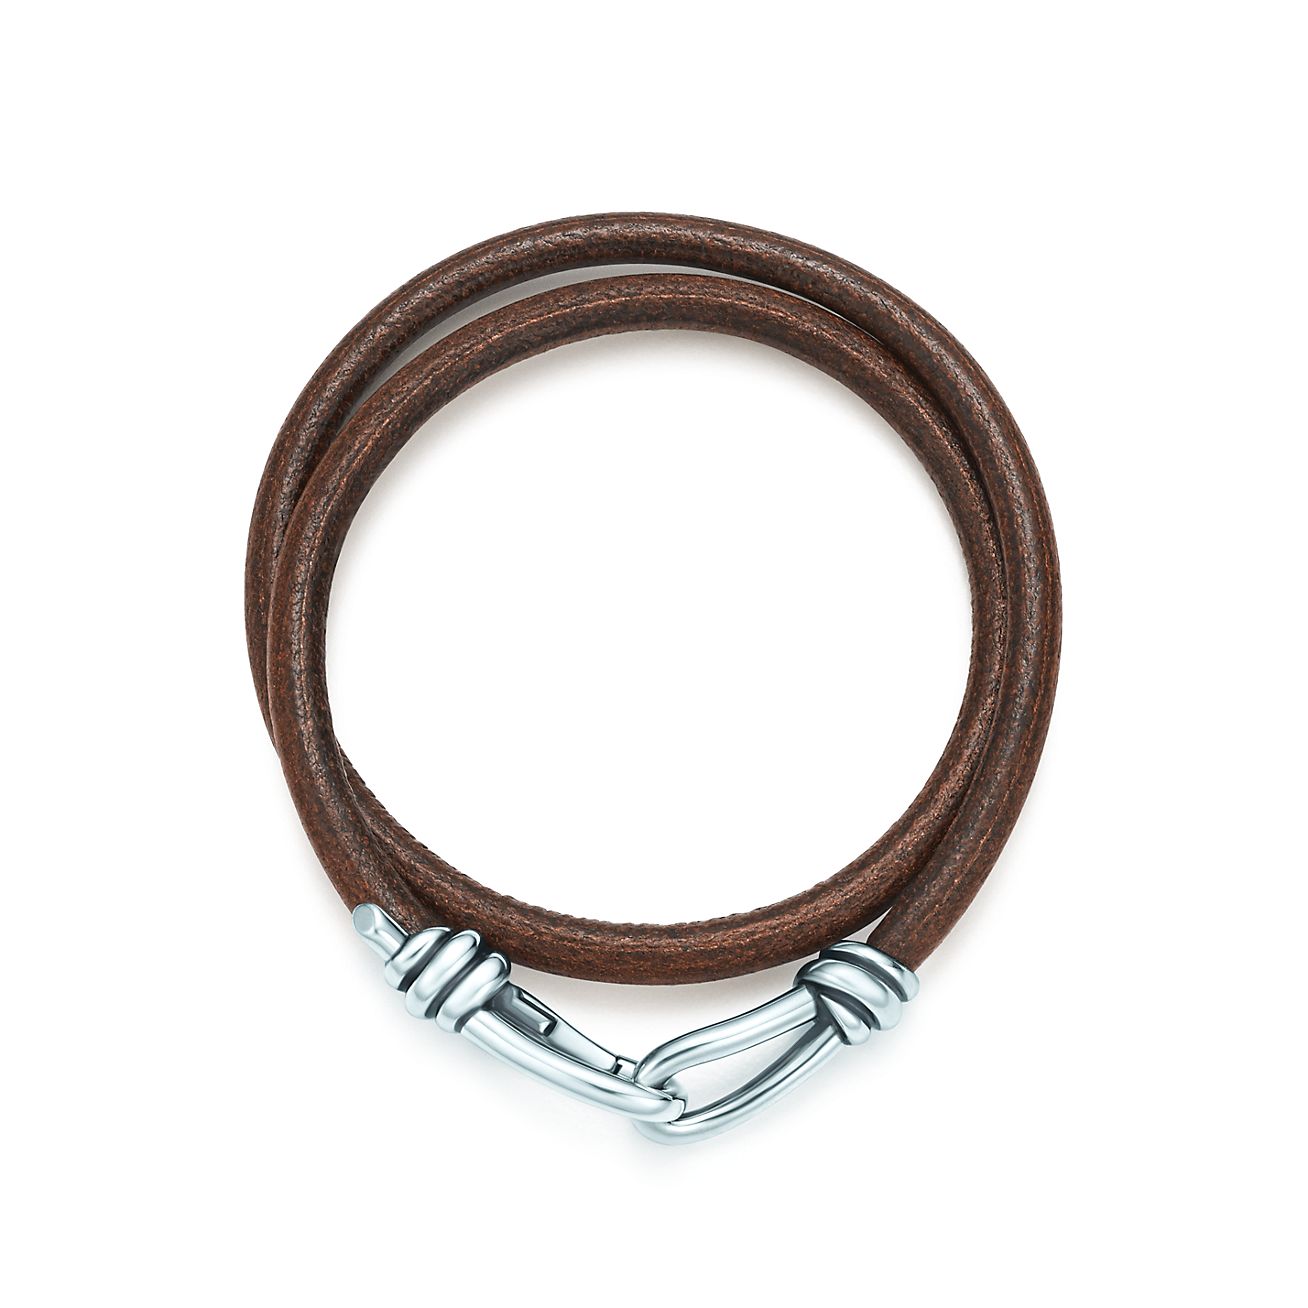 tiffany and co leather bracelet